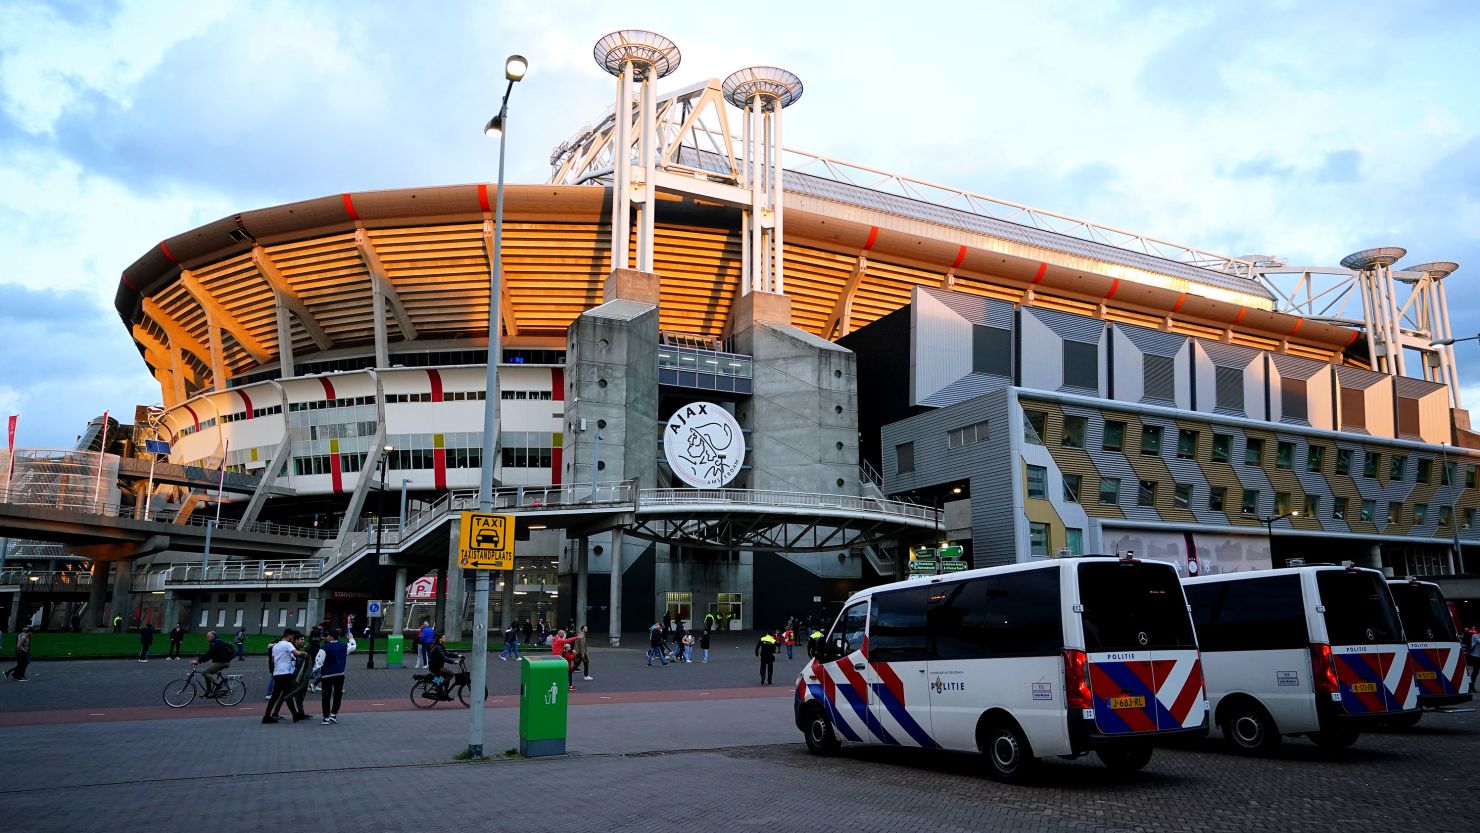 Police vans outside the Johan Cruijff Arena in Amsterdam, Netherlands, ahead of a UEFA Champions League match in October 2022.